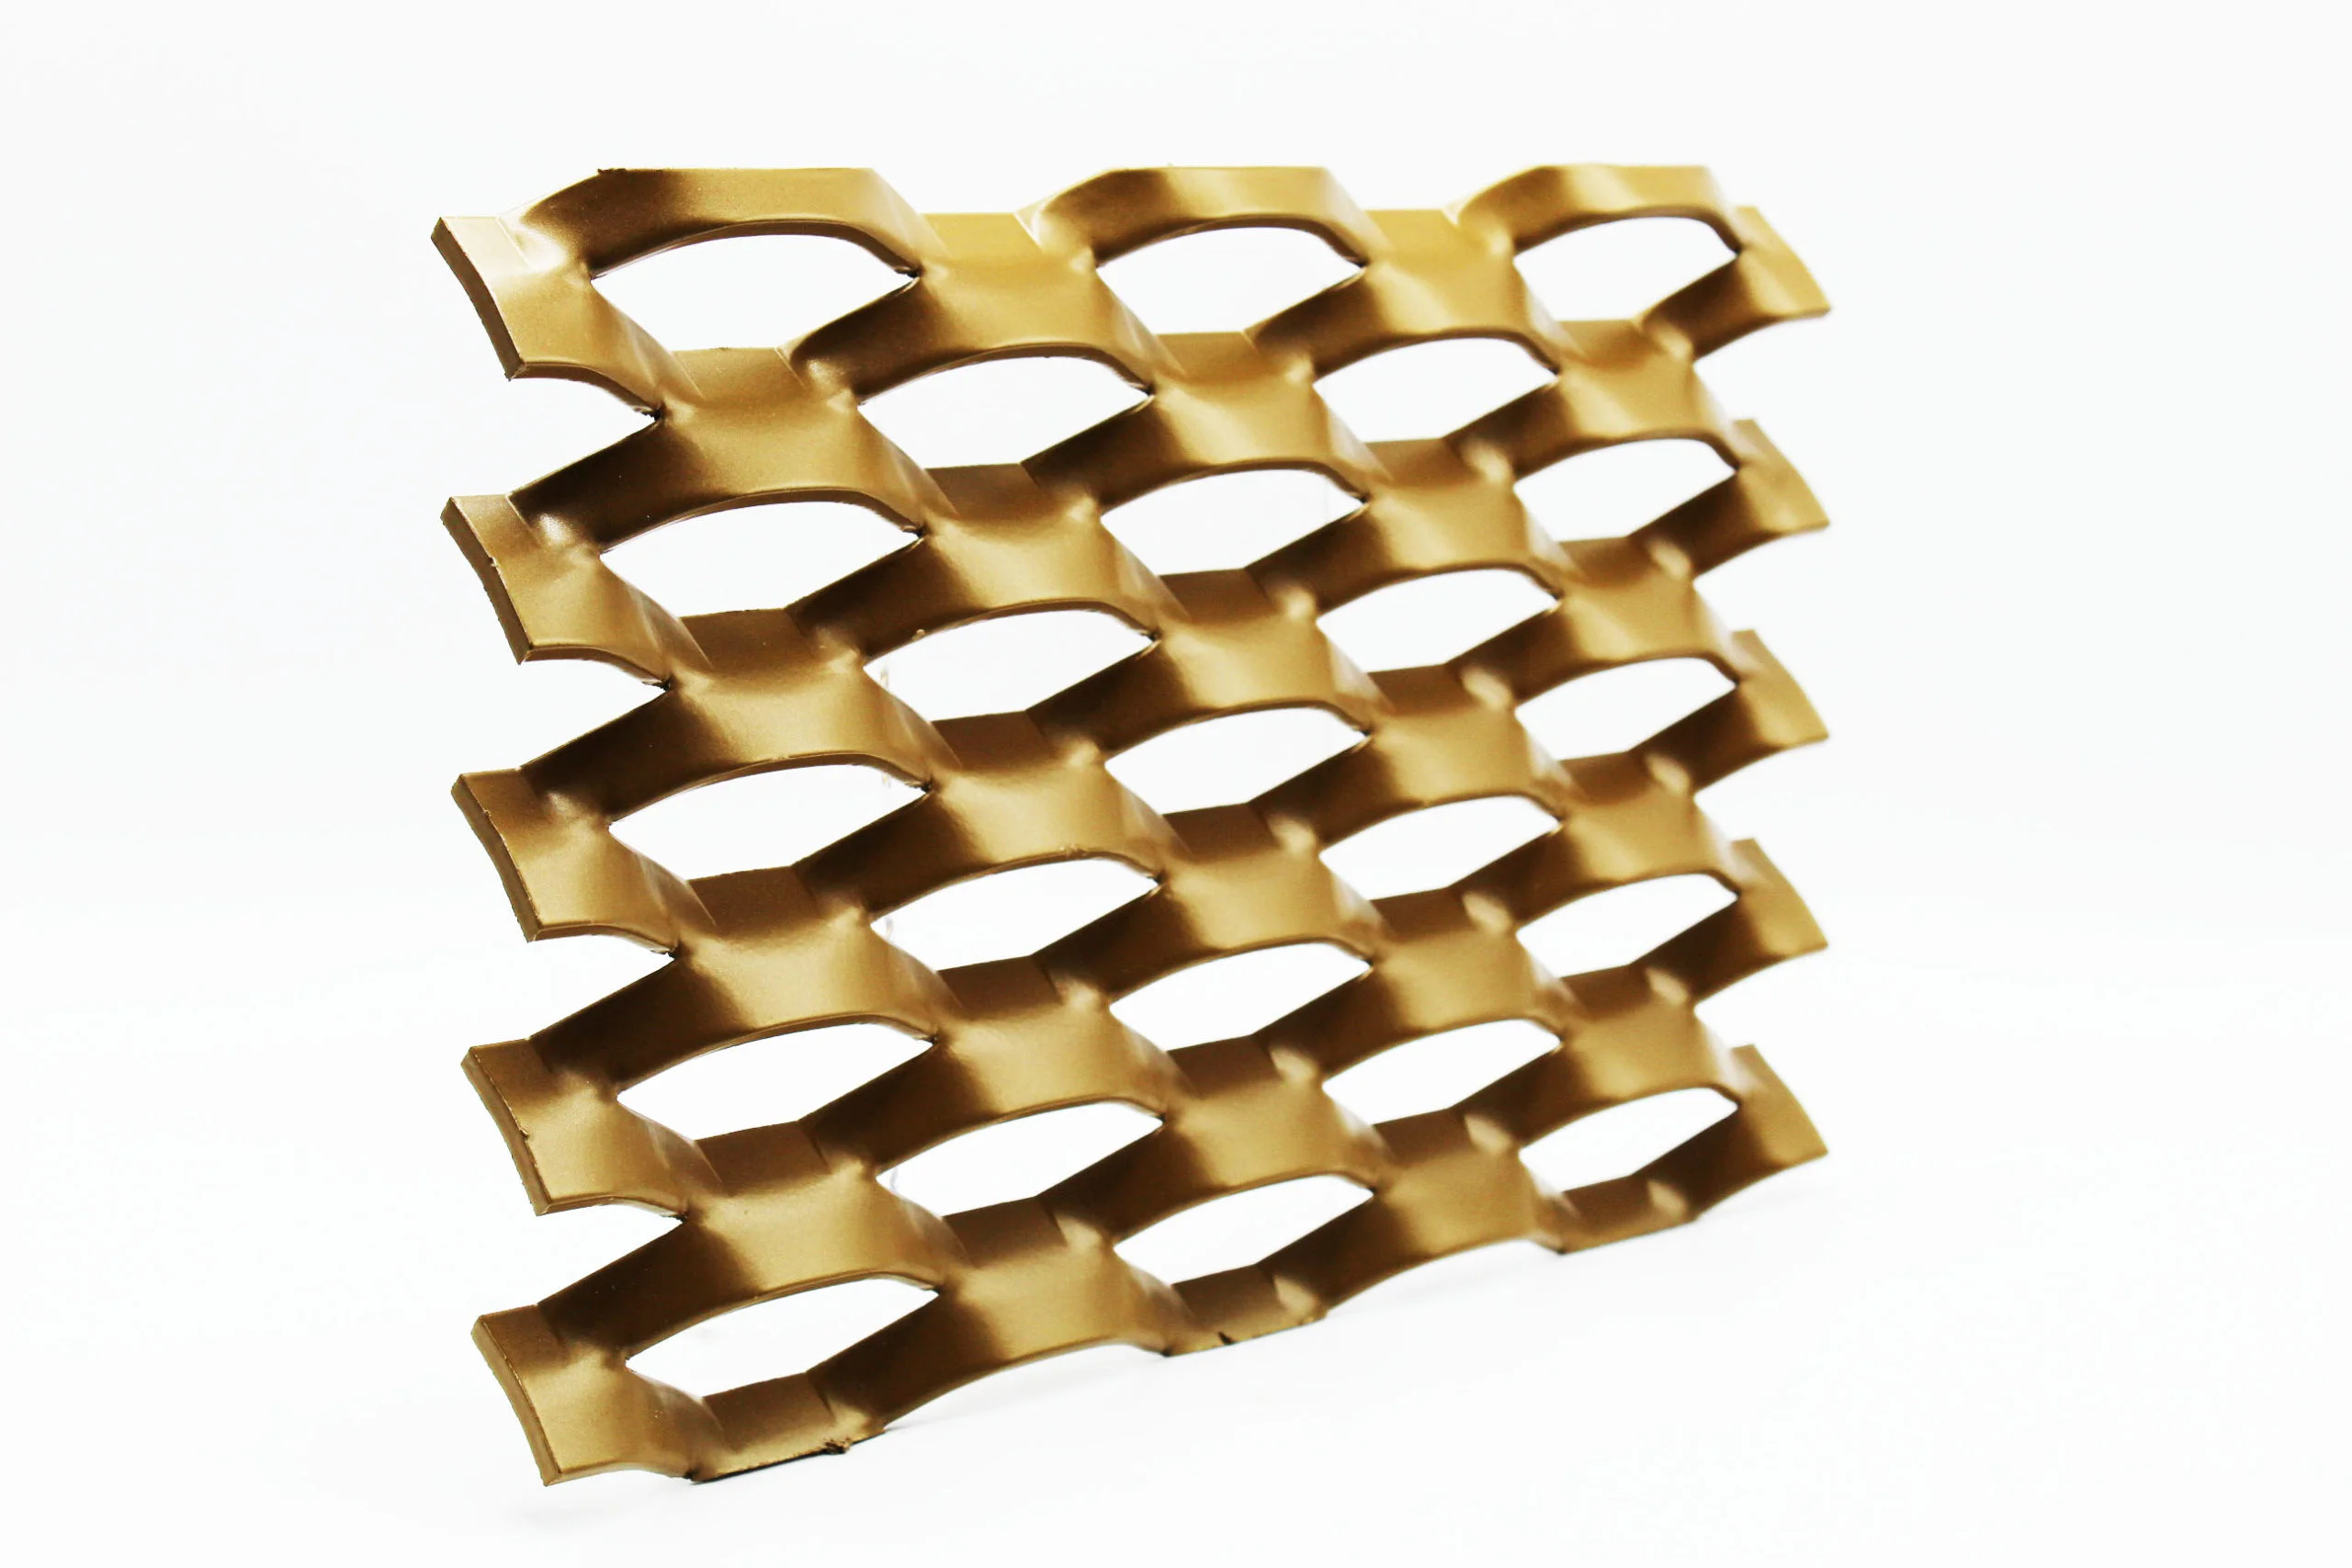 Mancunia gold expanded architectural mesh